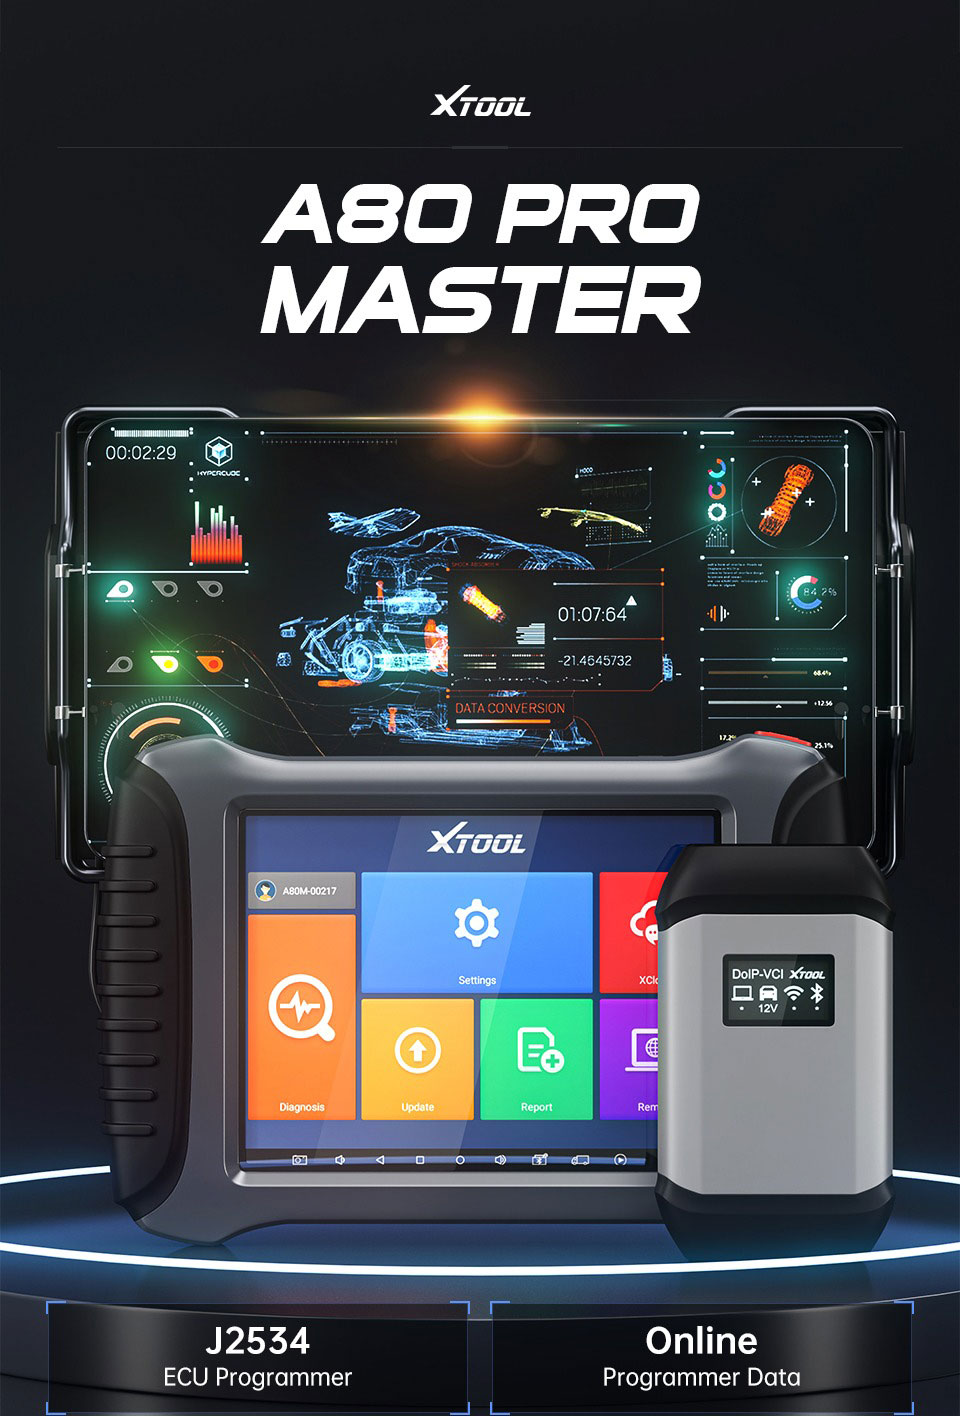 xtool a80 pro master feature 